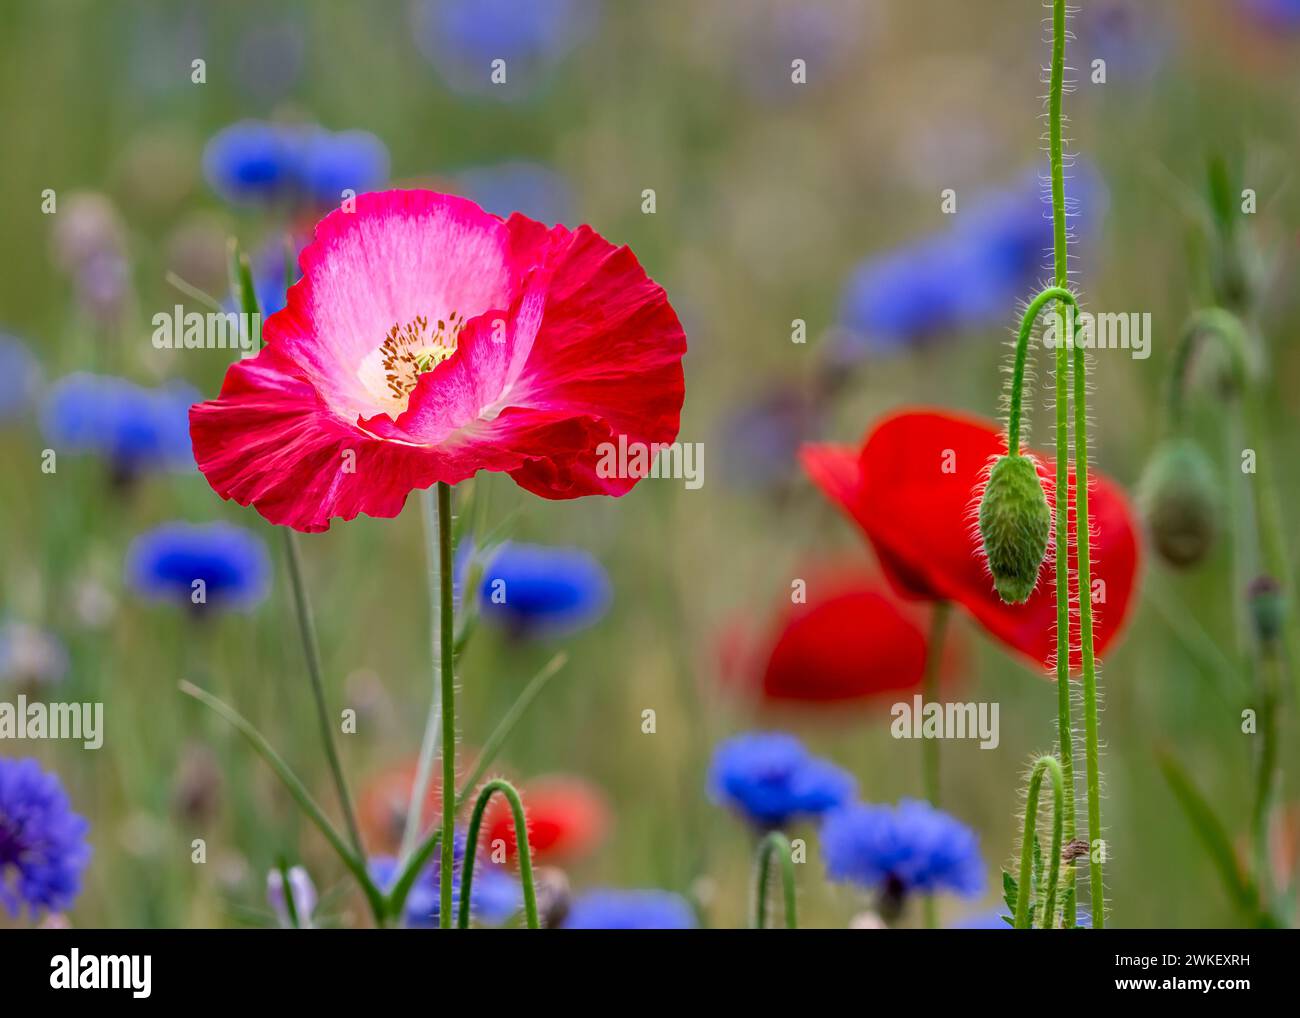 Blooming Flanders poppy flower and buds, Pleasant Hill Farm, Fennville, Michigan. Stock Photo